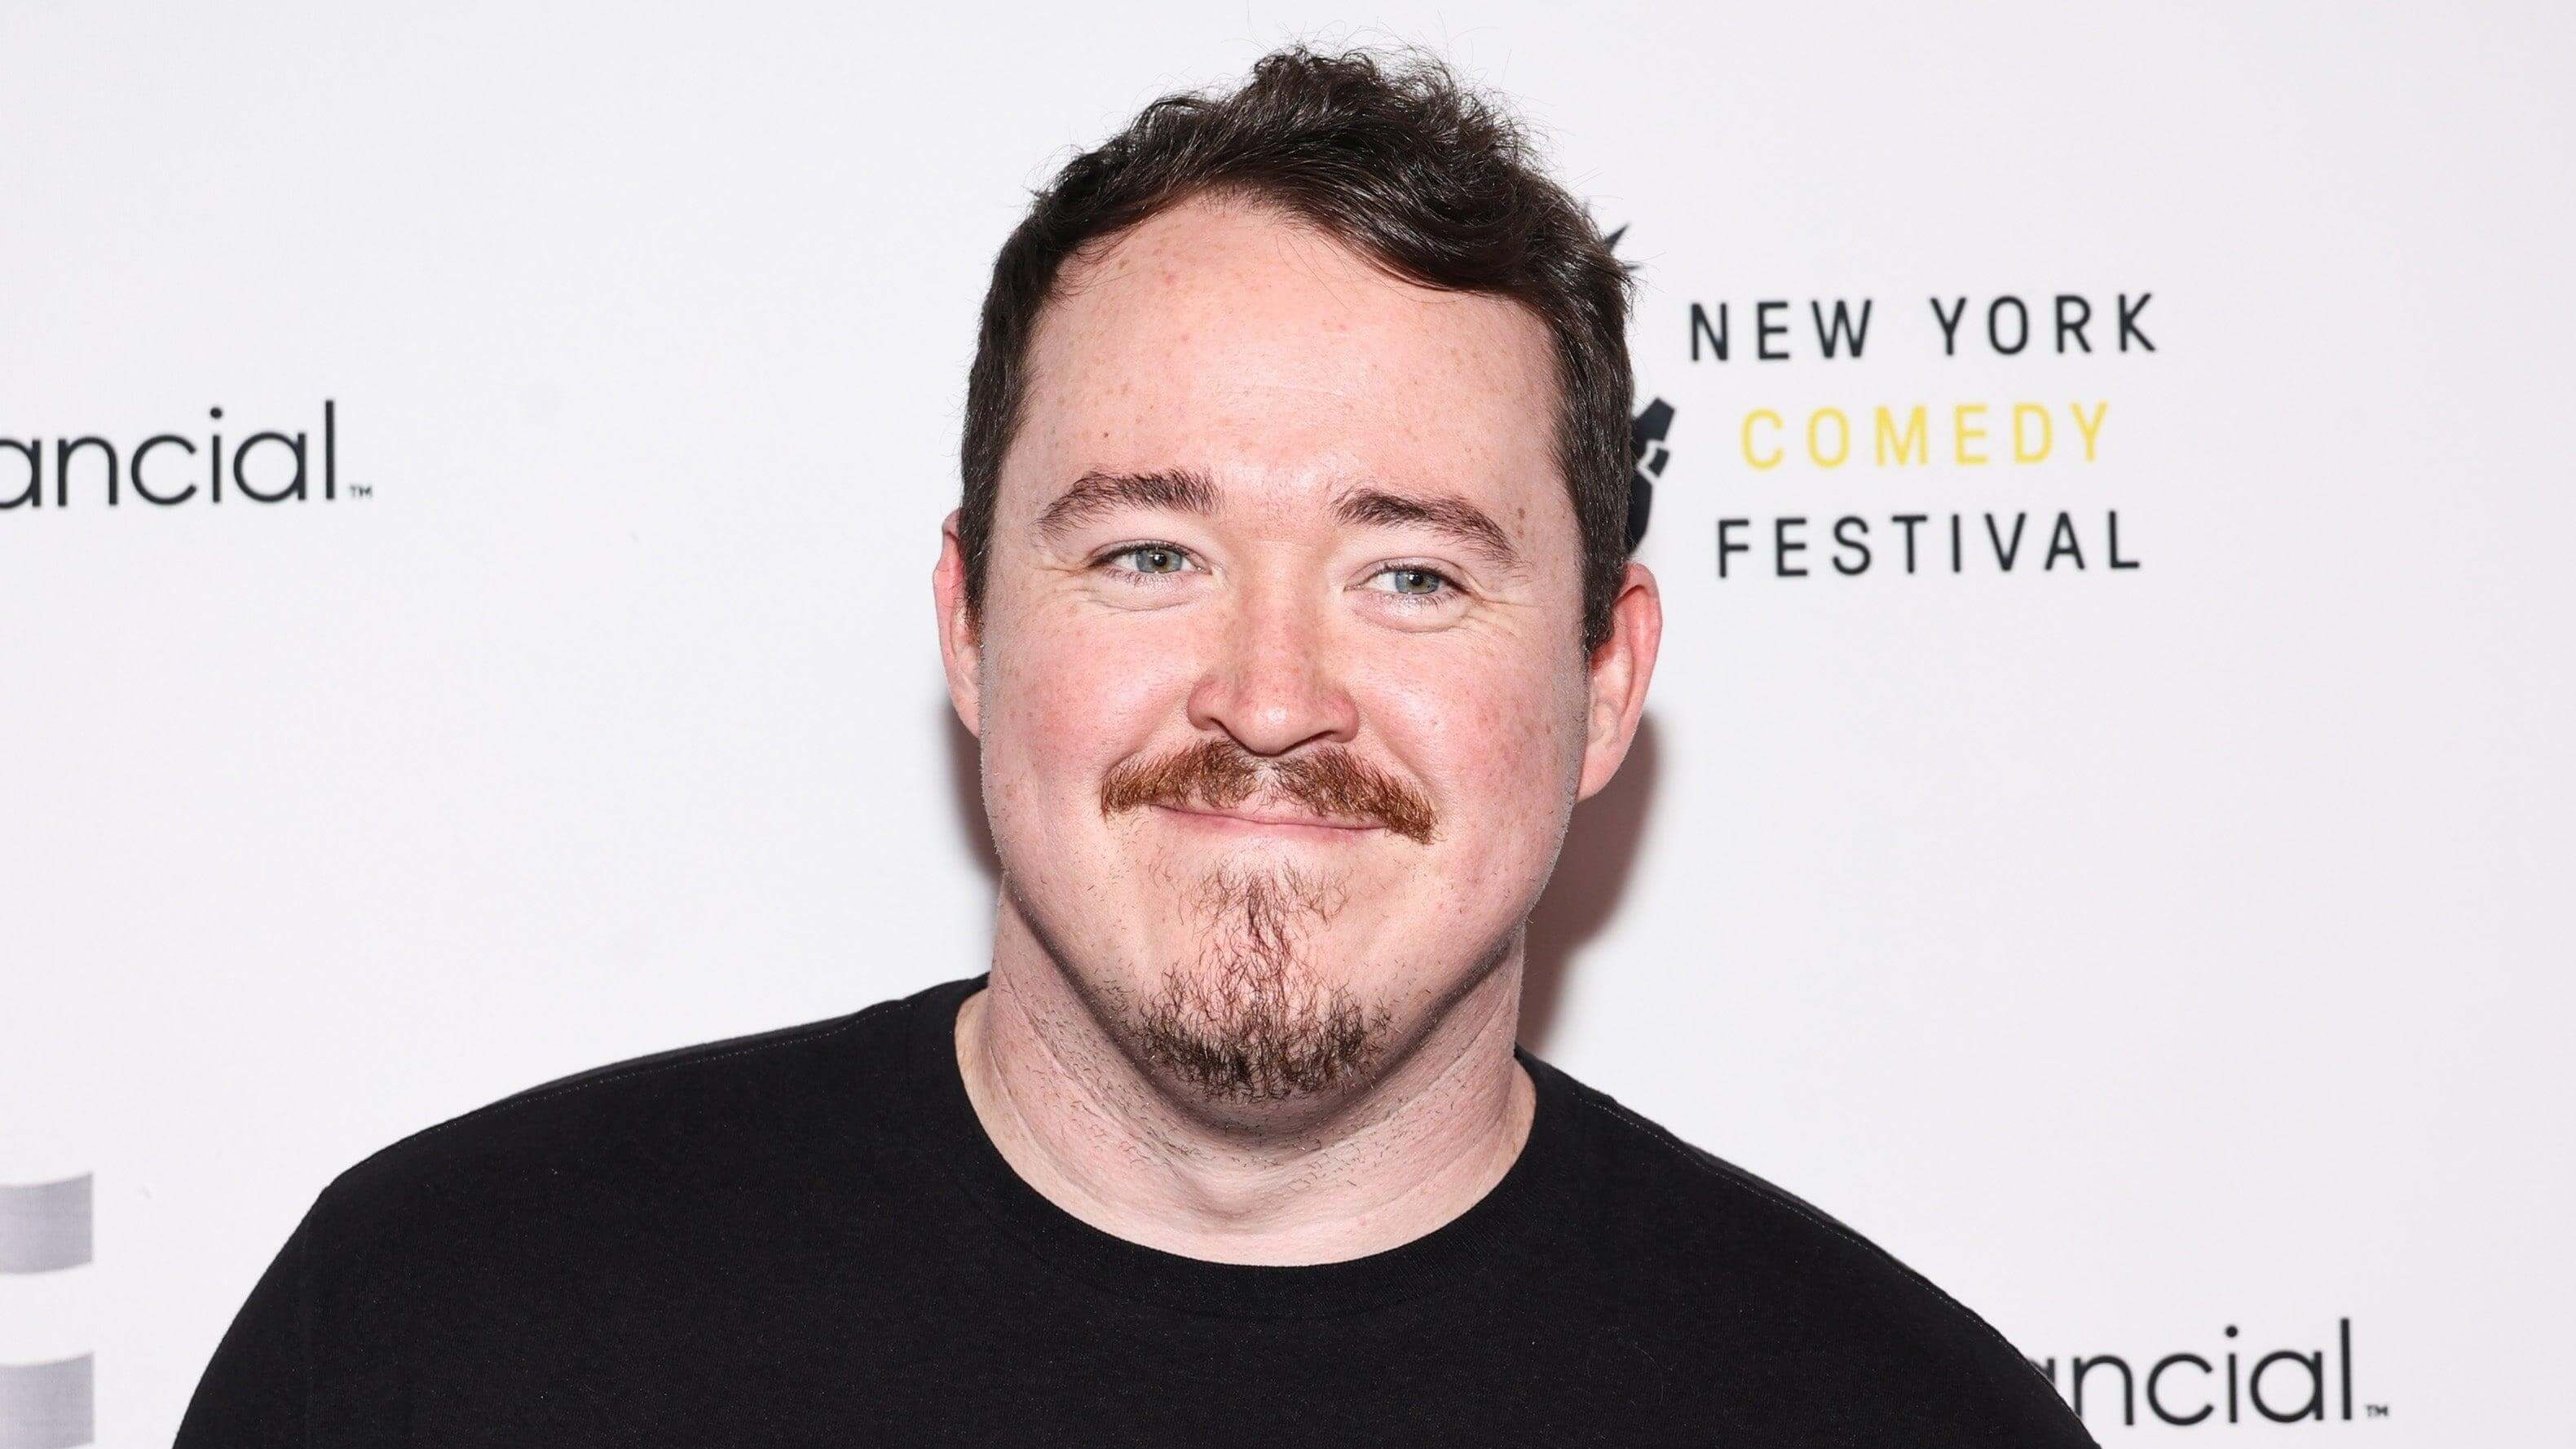 Shane Gillis tapped to host SNL after being fired for “hurtful, unacceptable language”